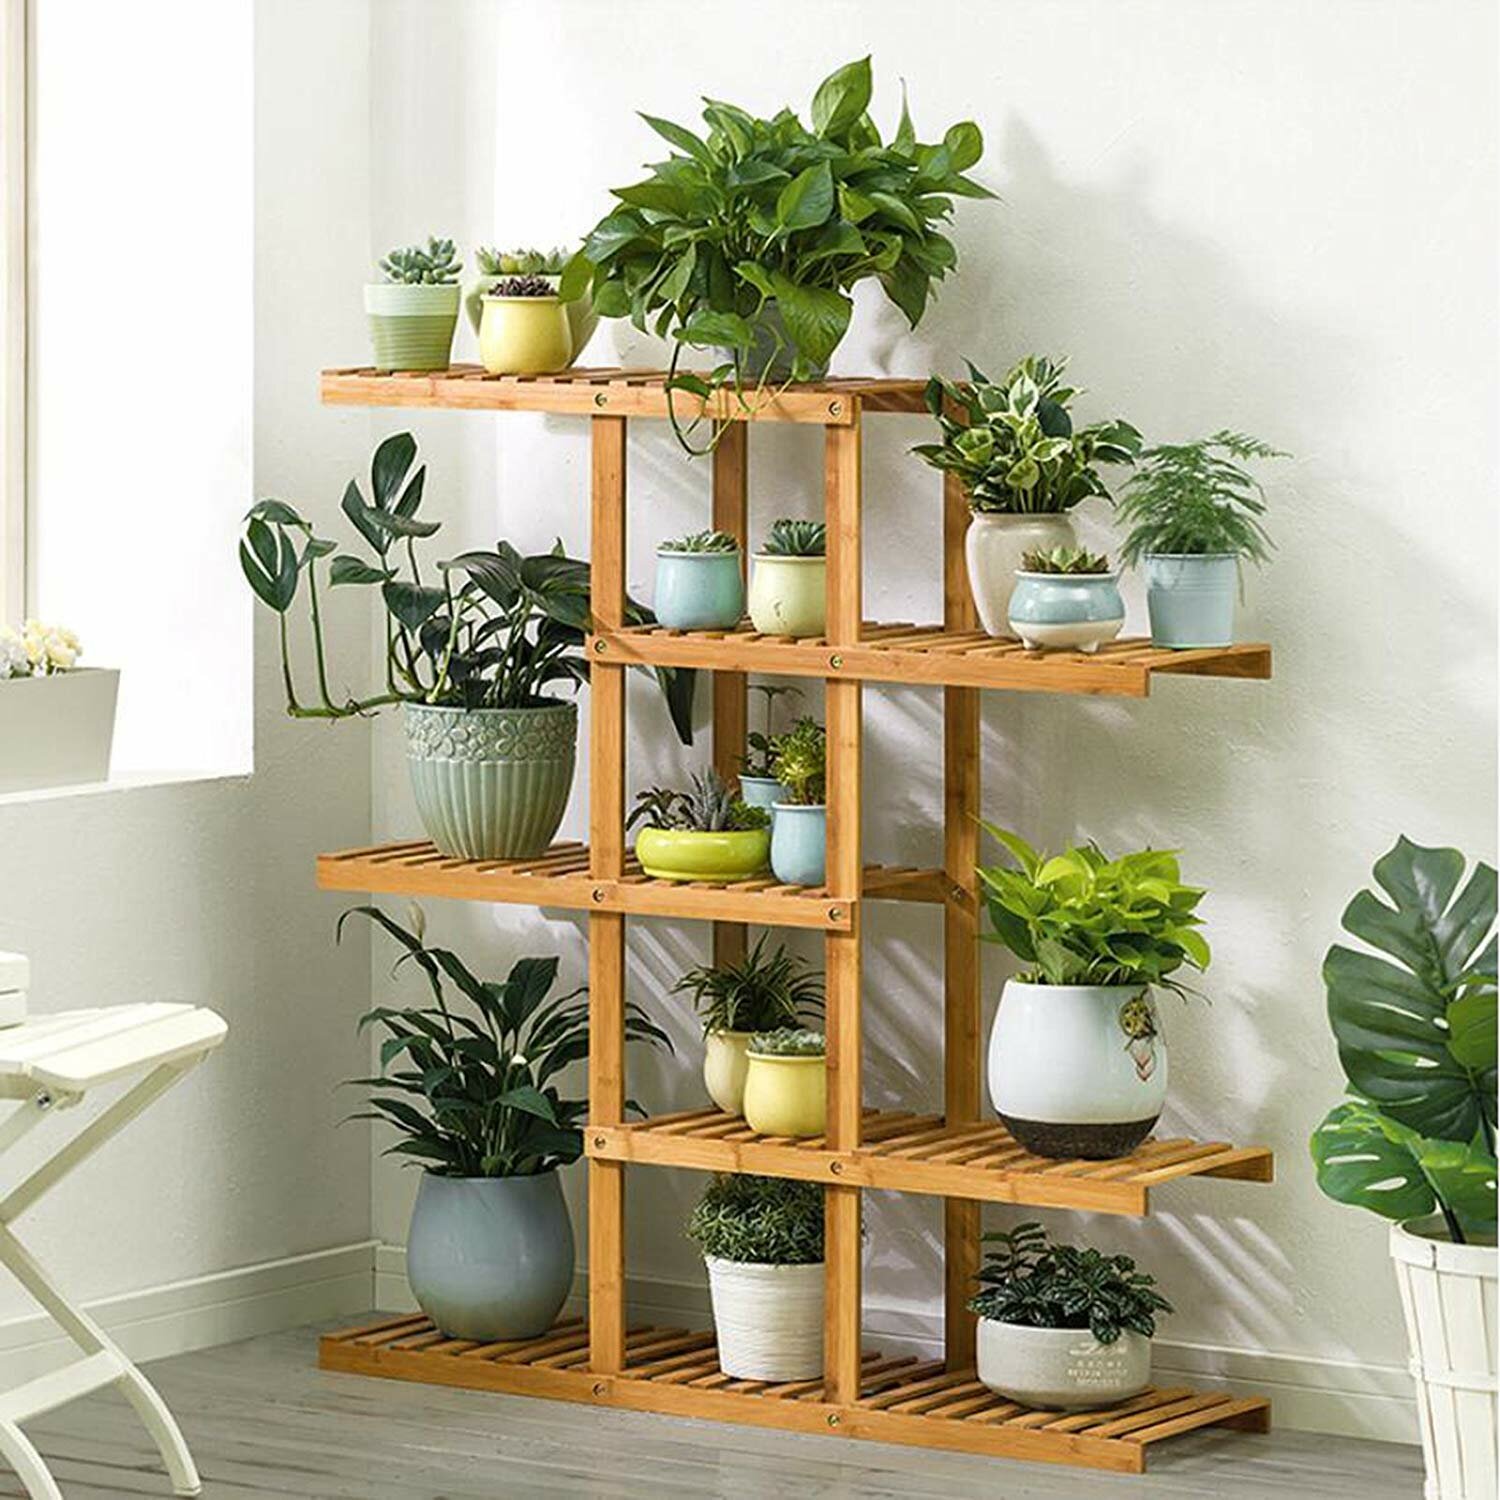 Bamboo Wood 4-Shelf Bookcase Plant Stand Shelving Unit - Pictured